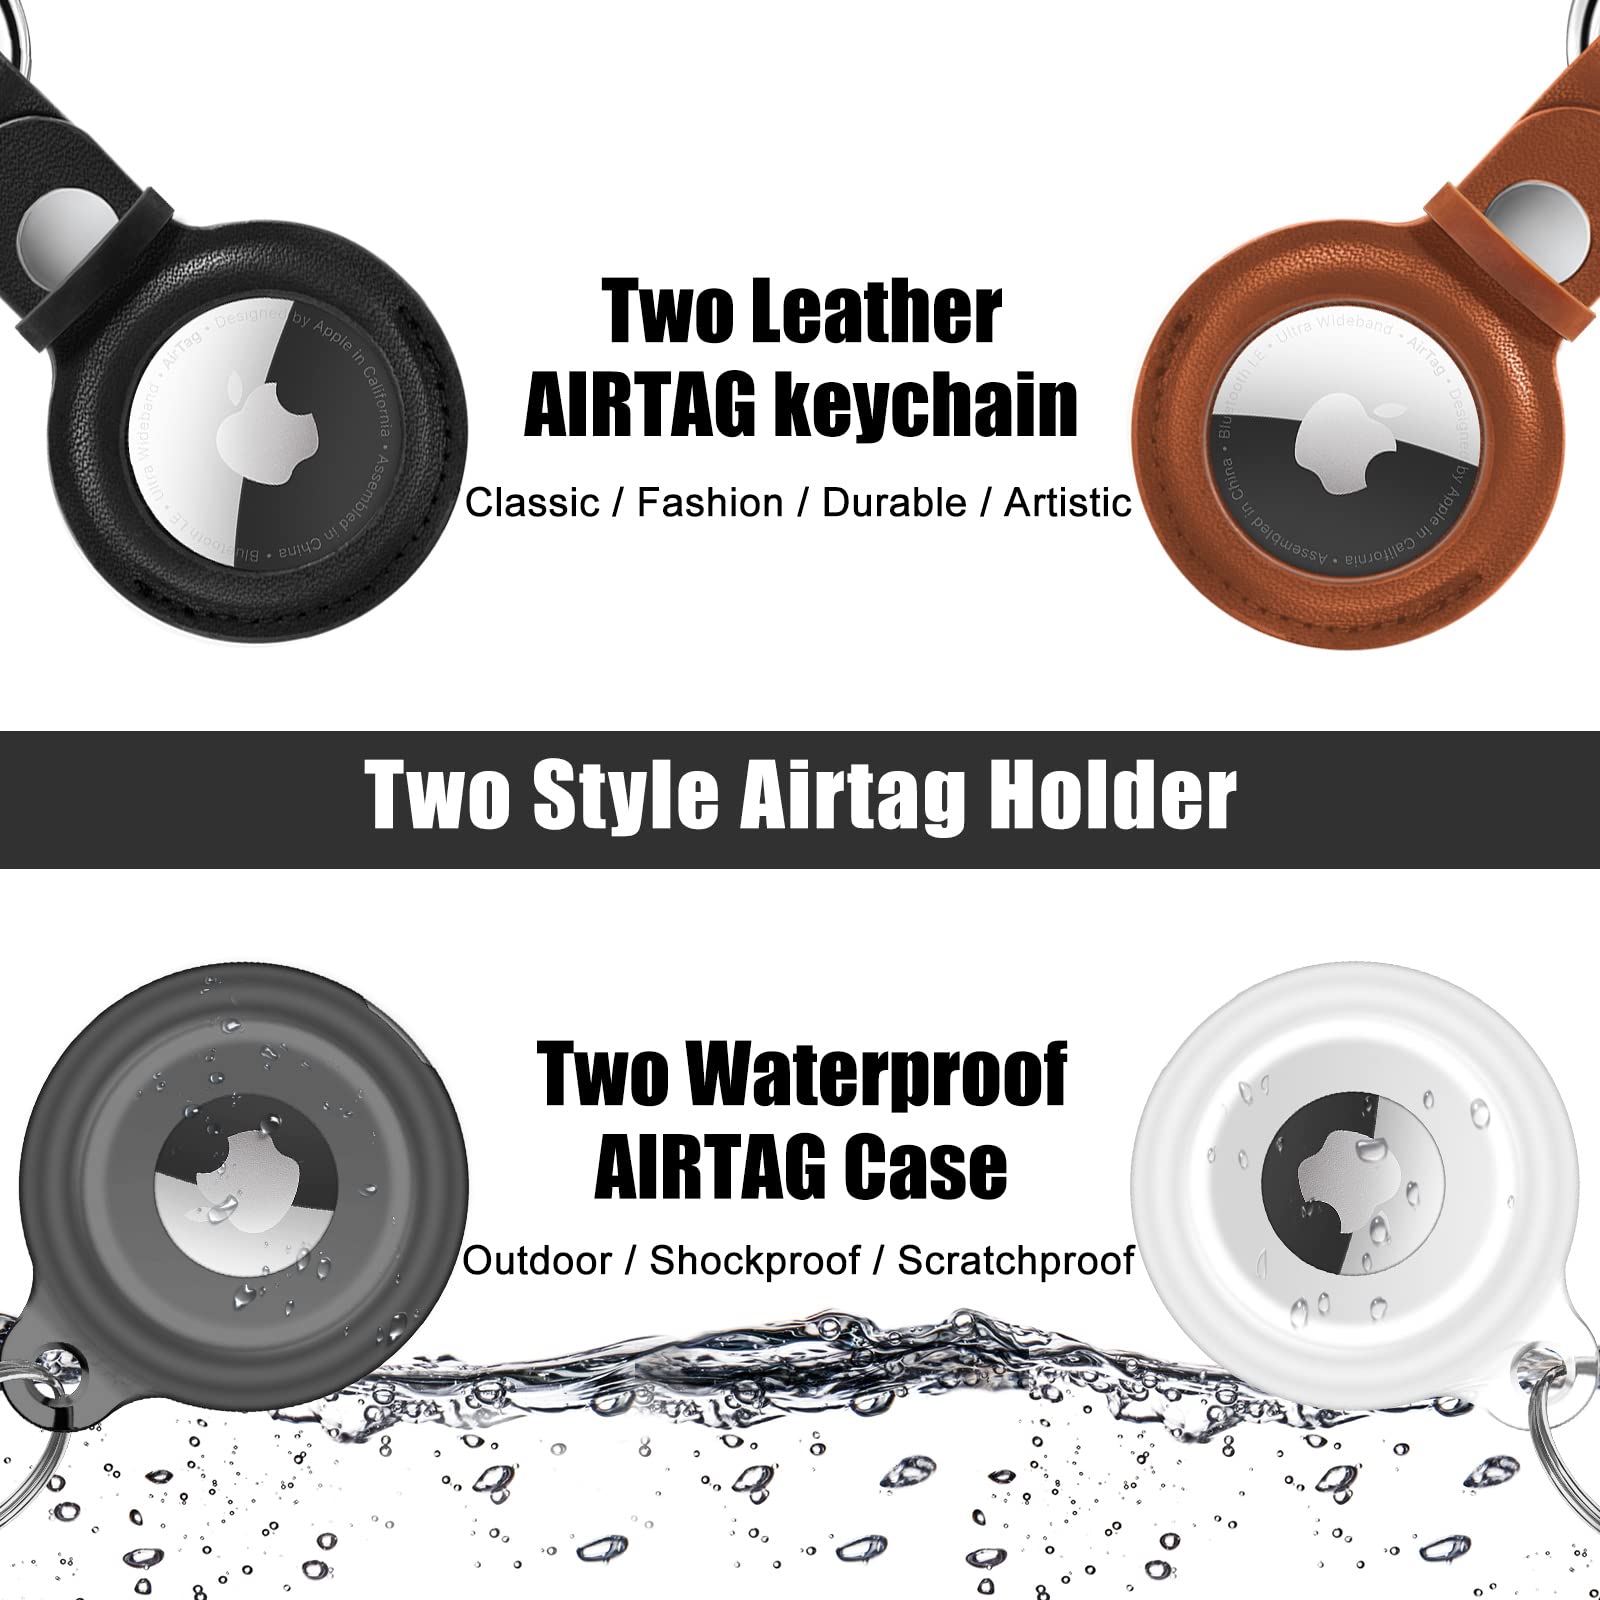 SUPFINE for Airtag Holder Waterproof & Airtag Keychain Leather 4 Pack, Air tag Case Protective Tracker with Loop Key Ring for Apple Airtags, Airtag Cover for Wallet Luggage Cat Dog Pets (Multi-Color)